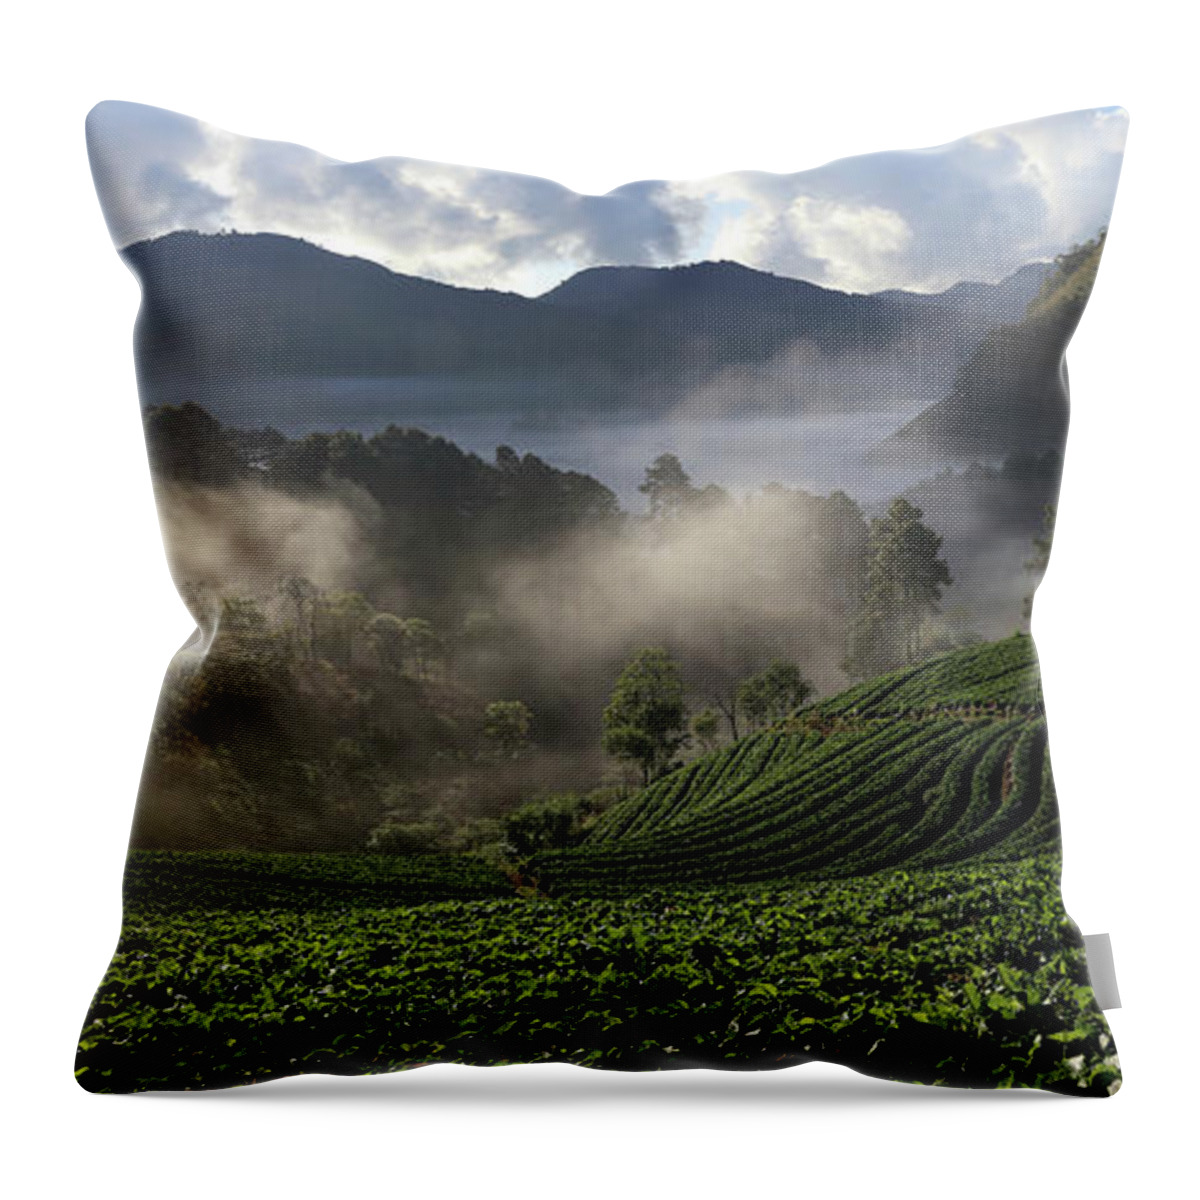 Tranquility Throw Pillow featuring the photograph Strawberry Field by Athit Perawongmetha